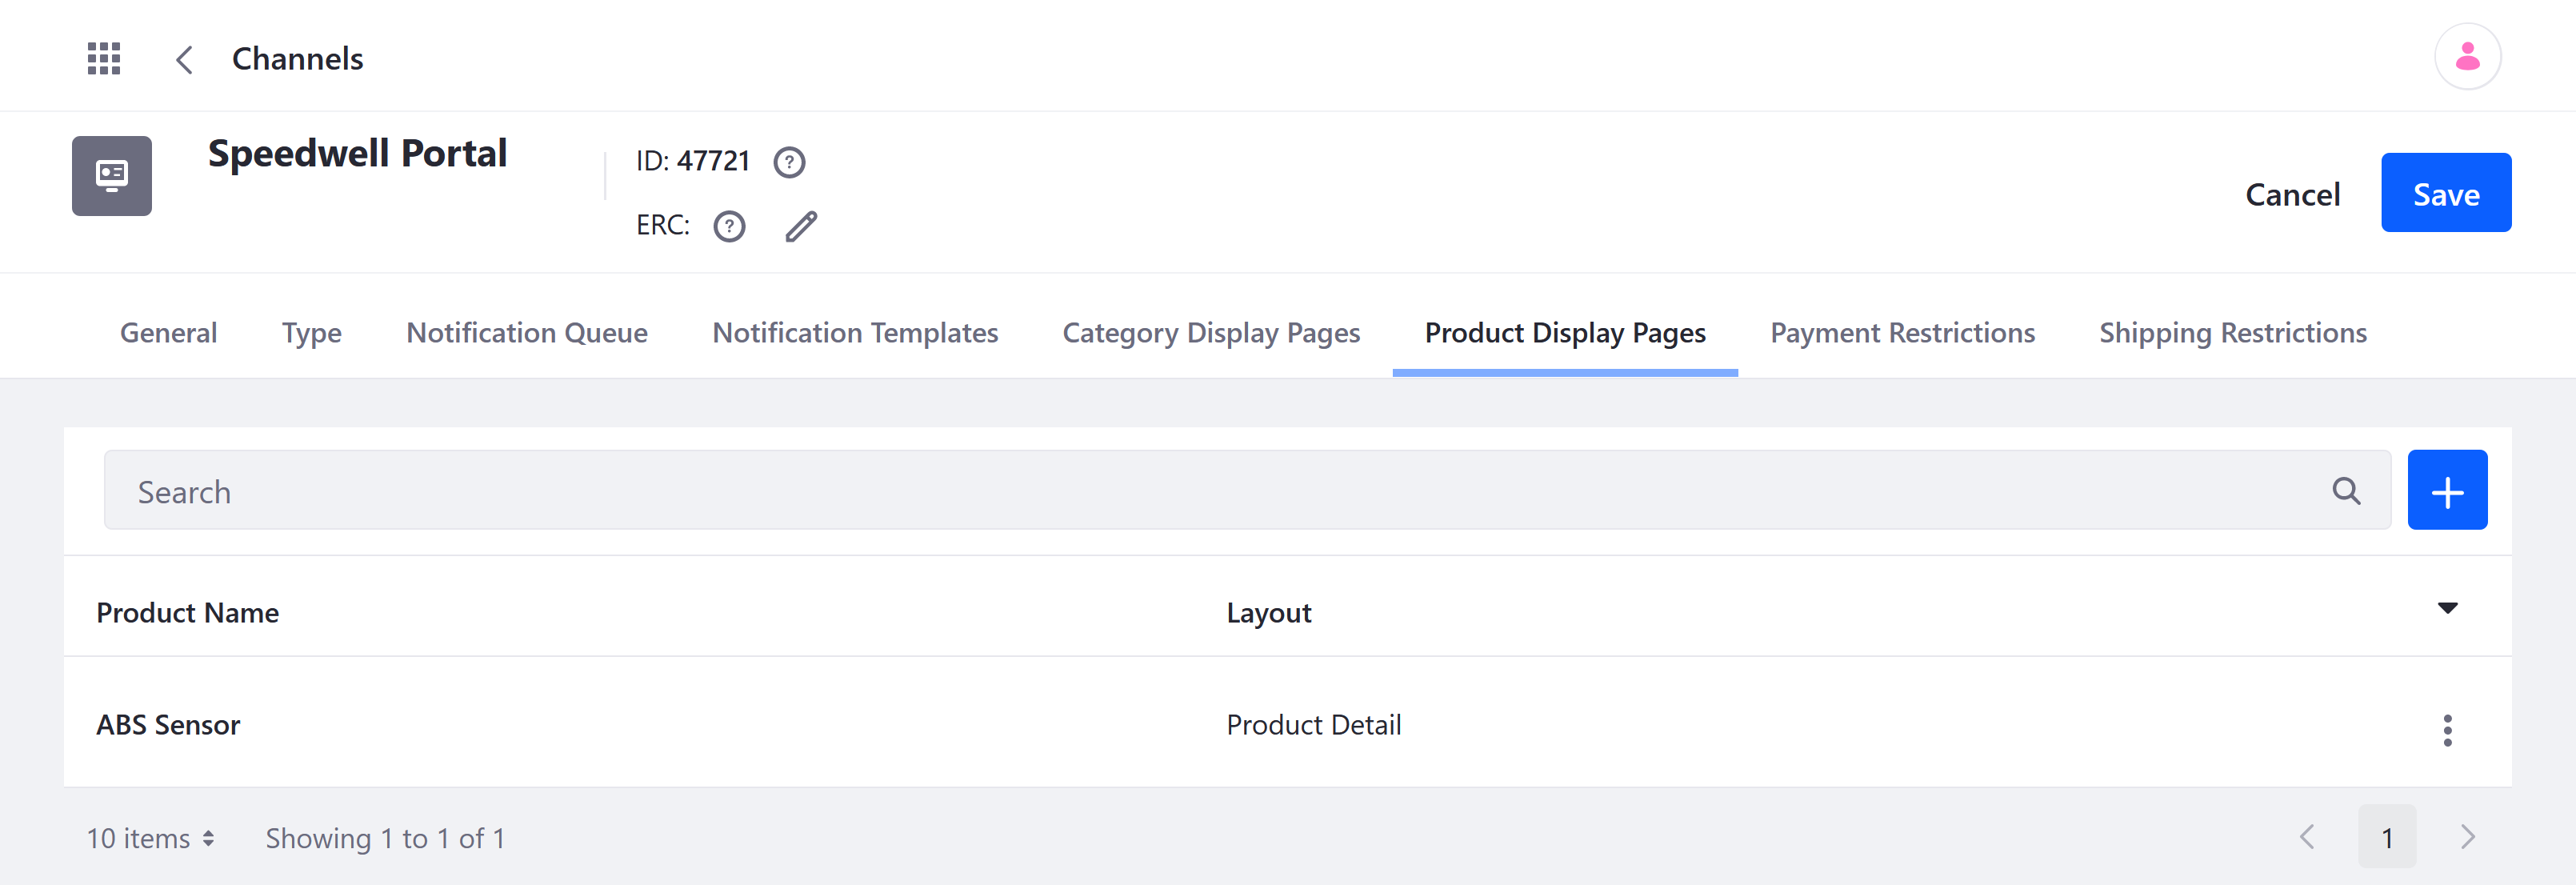 View and manage all saved configurations via the Product Display Pages tab.